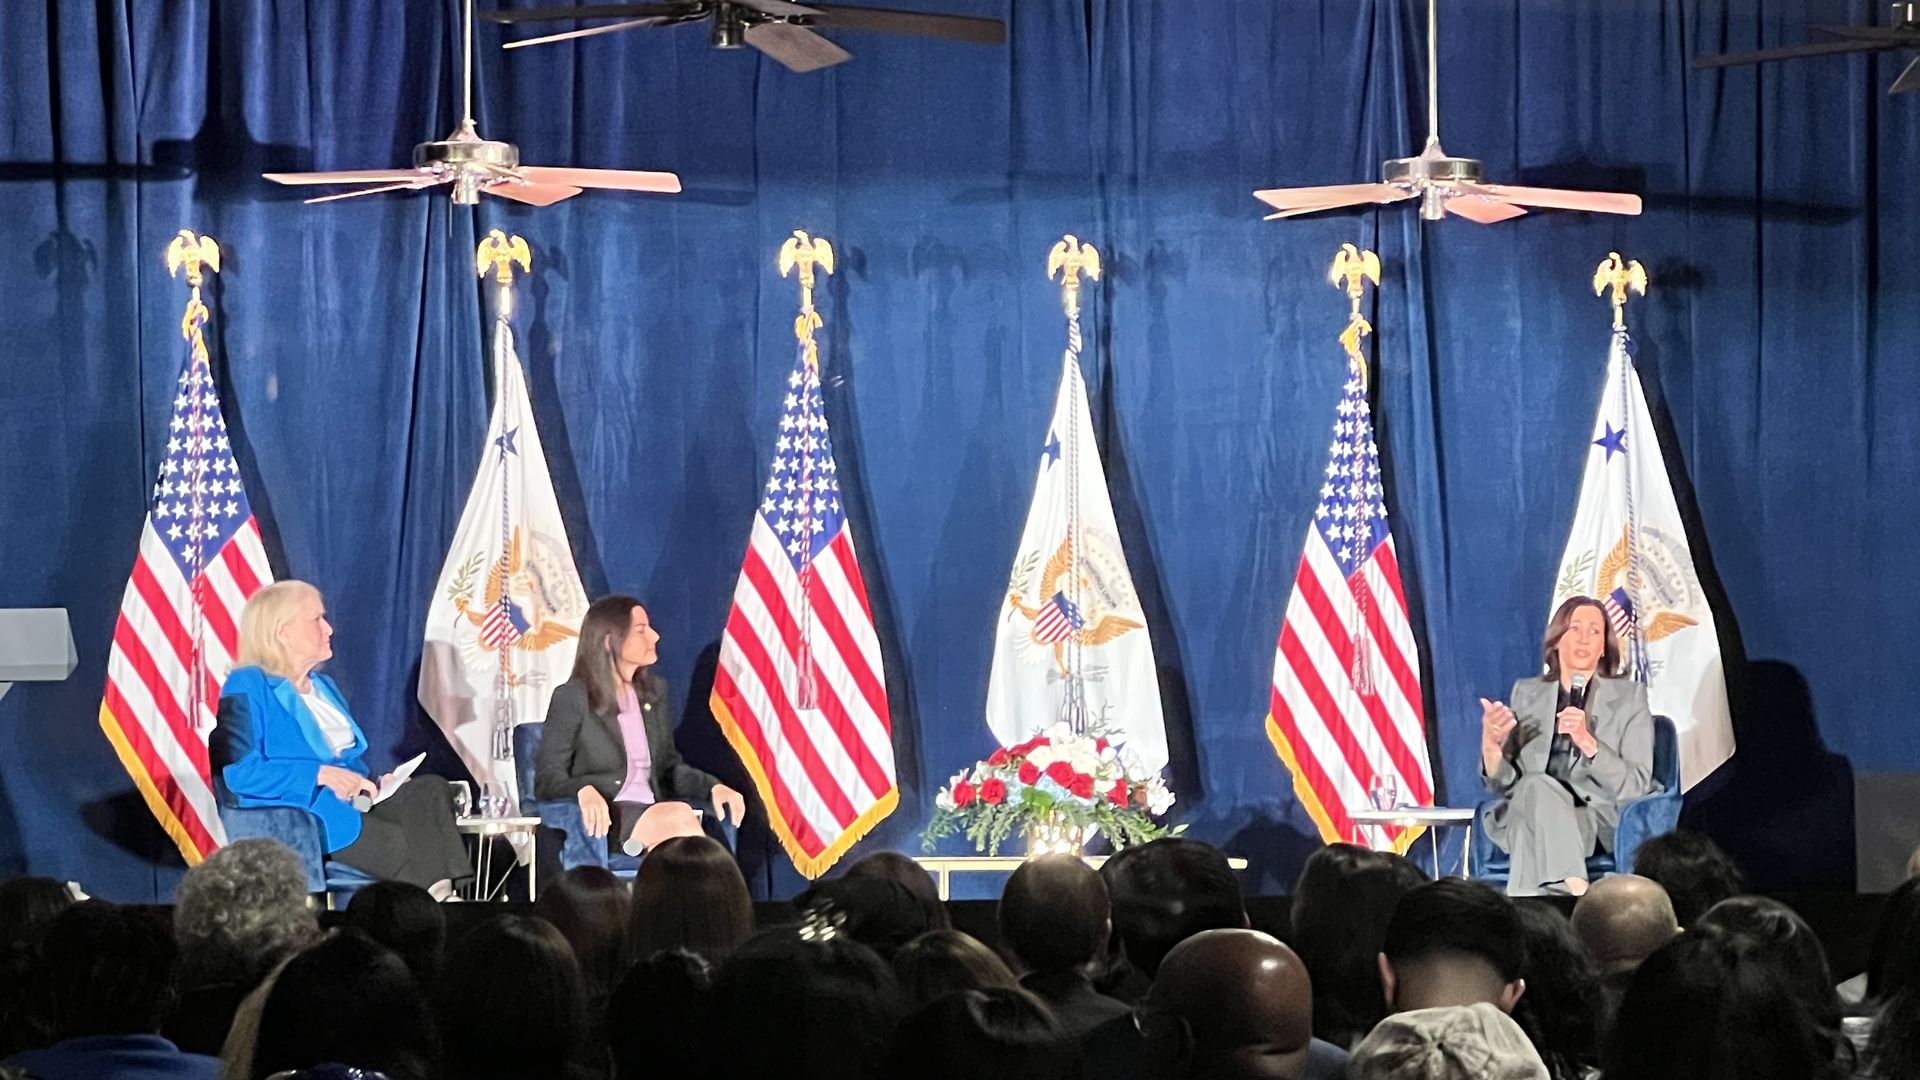 Photo of three women sitting on a stage, in front of multiple USA flags